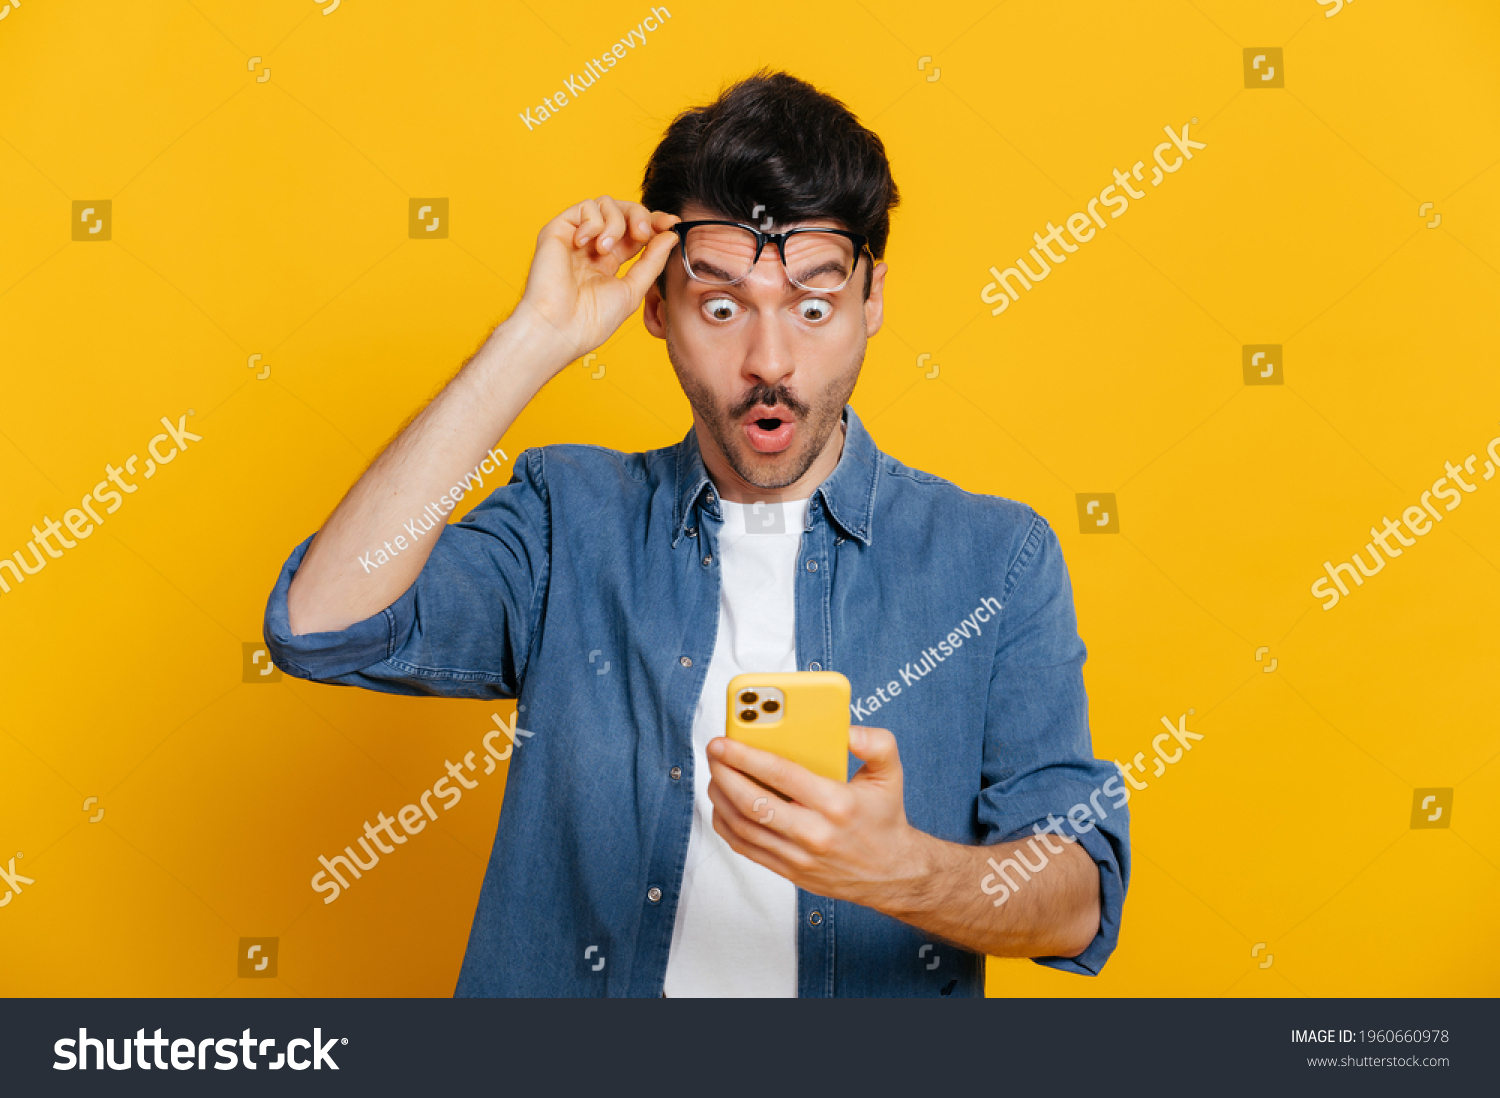 Amazed shocked caucasian guy holding smartphone in his hand, looking at the phone in surprise with his glasses raised, stunned facial expression, stands on isolated orange background #1960660978